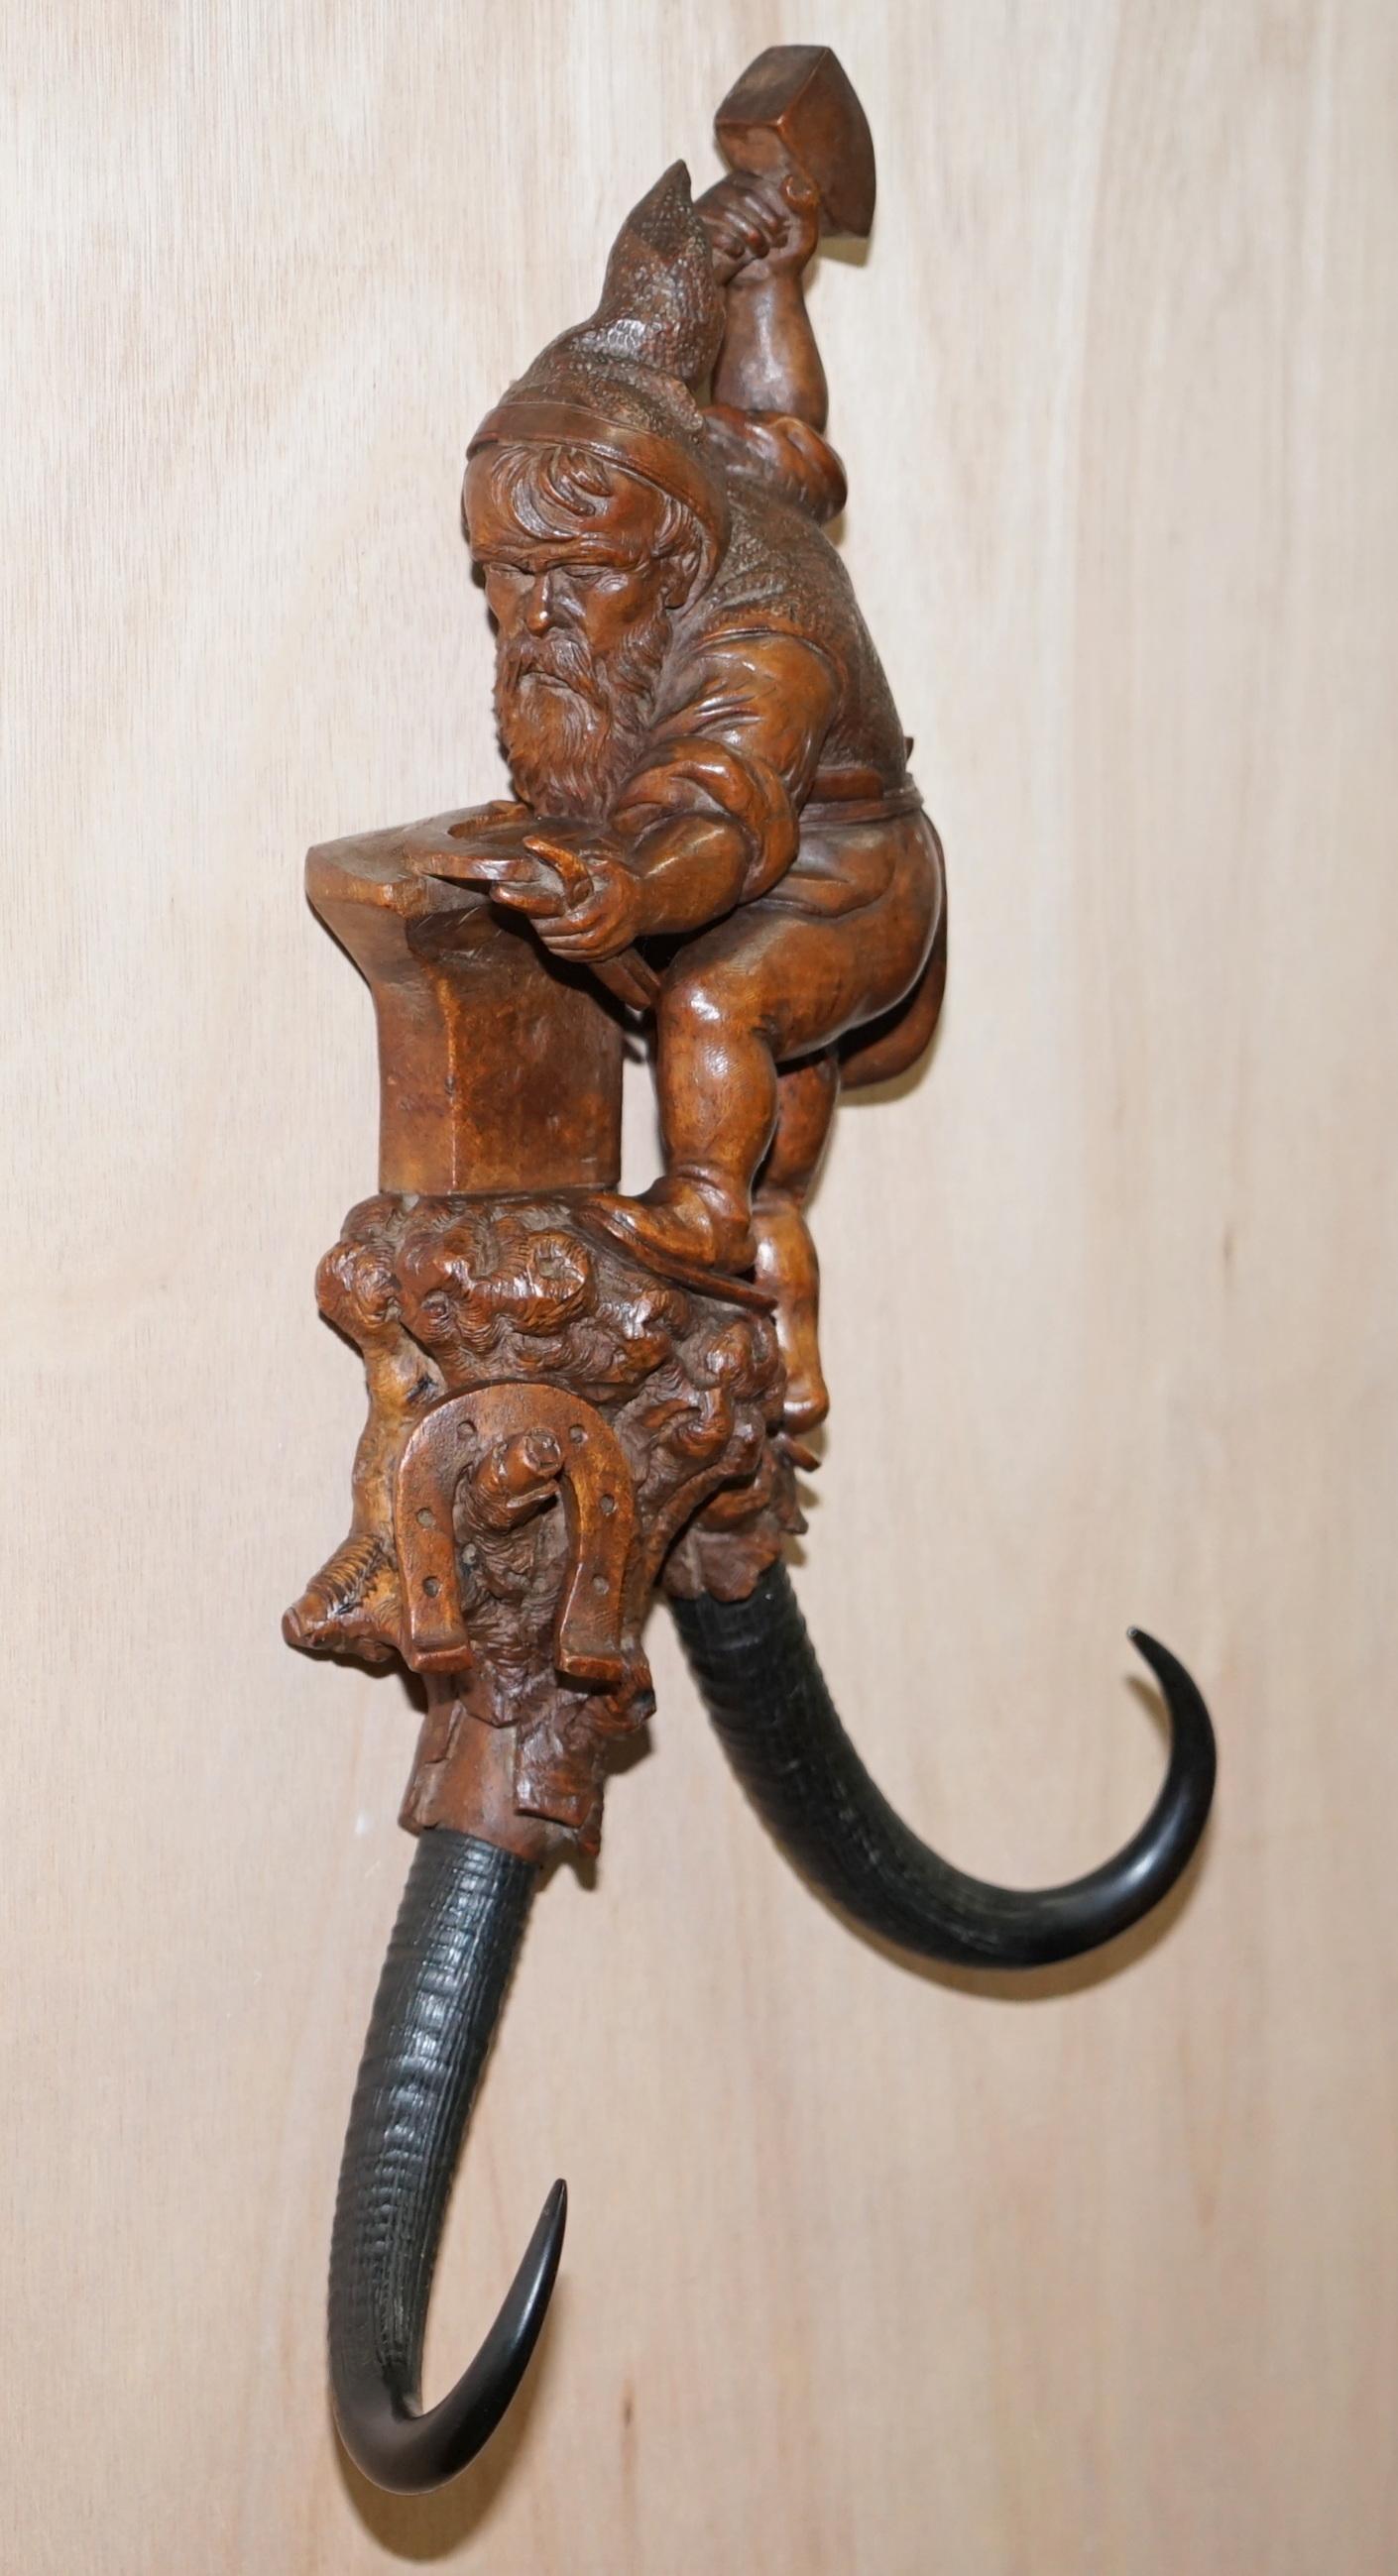 We are delighted to offer for sale this stunning original circa 1890 Swiss black forest wood whip hook of a dwarf blacksmith wielding a hammer

A very rare find, this is a large whip hook, they come in varying sizes and this is the largest I have